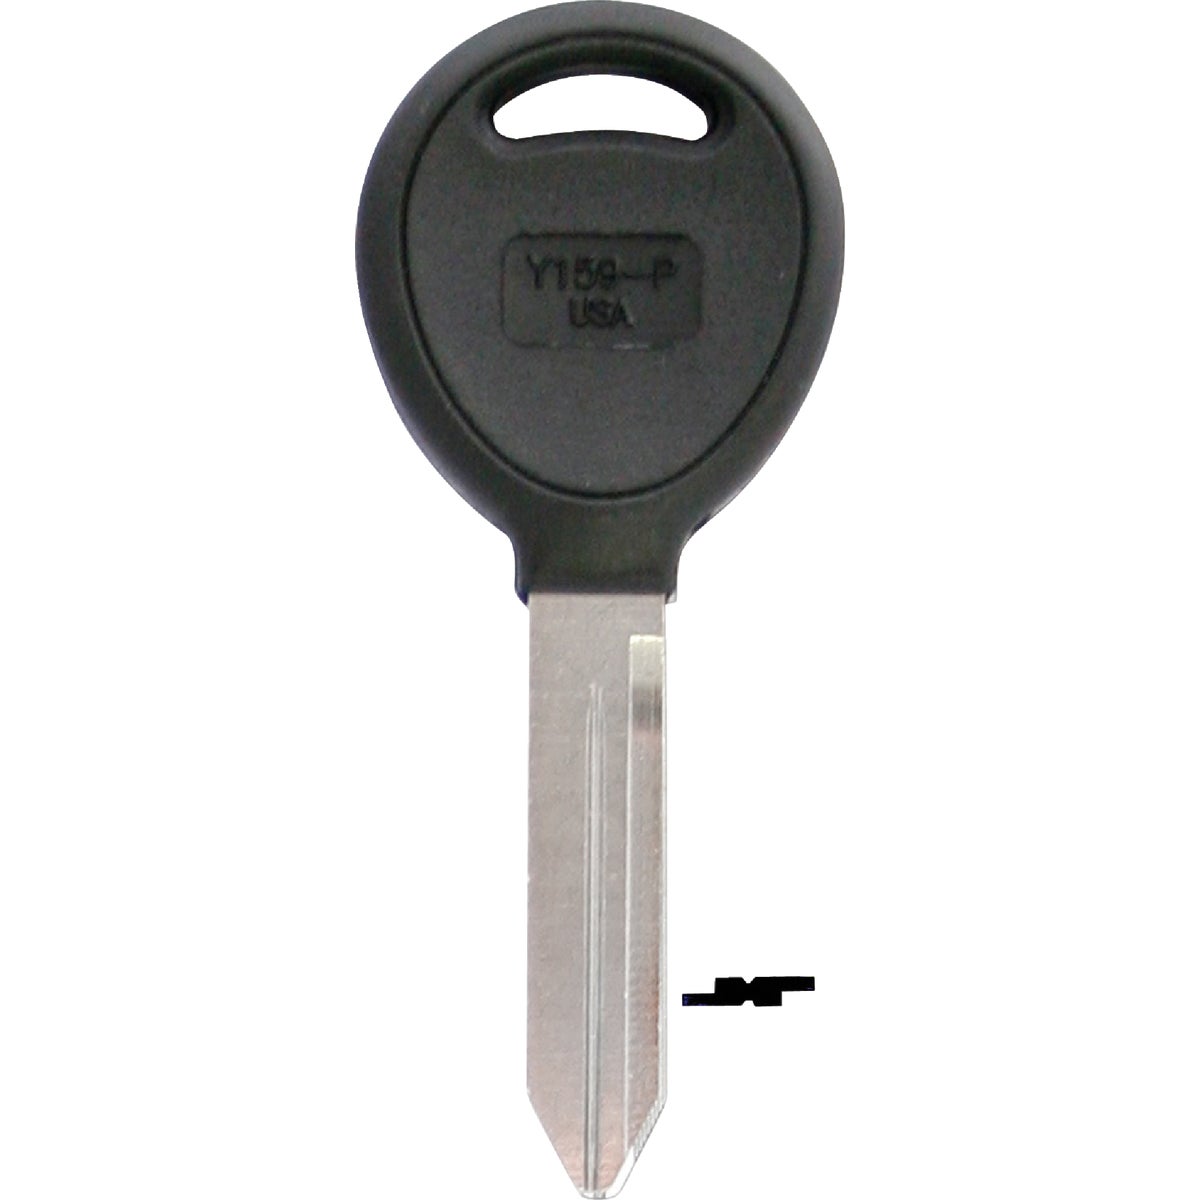 ILCO Chrysler Nickel Plated Automotive Key Y159-P (5-Pack)